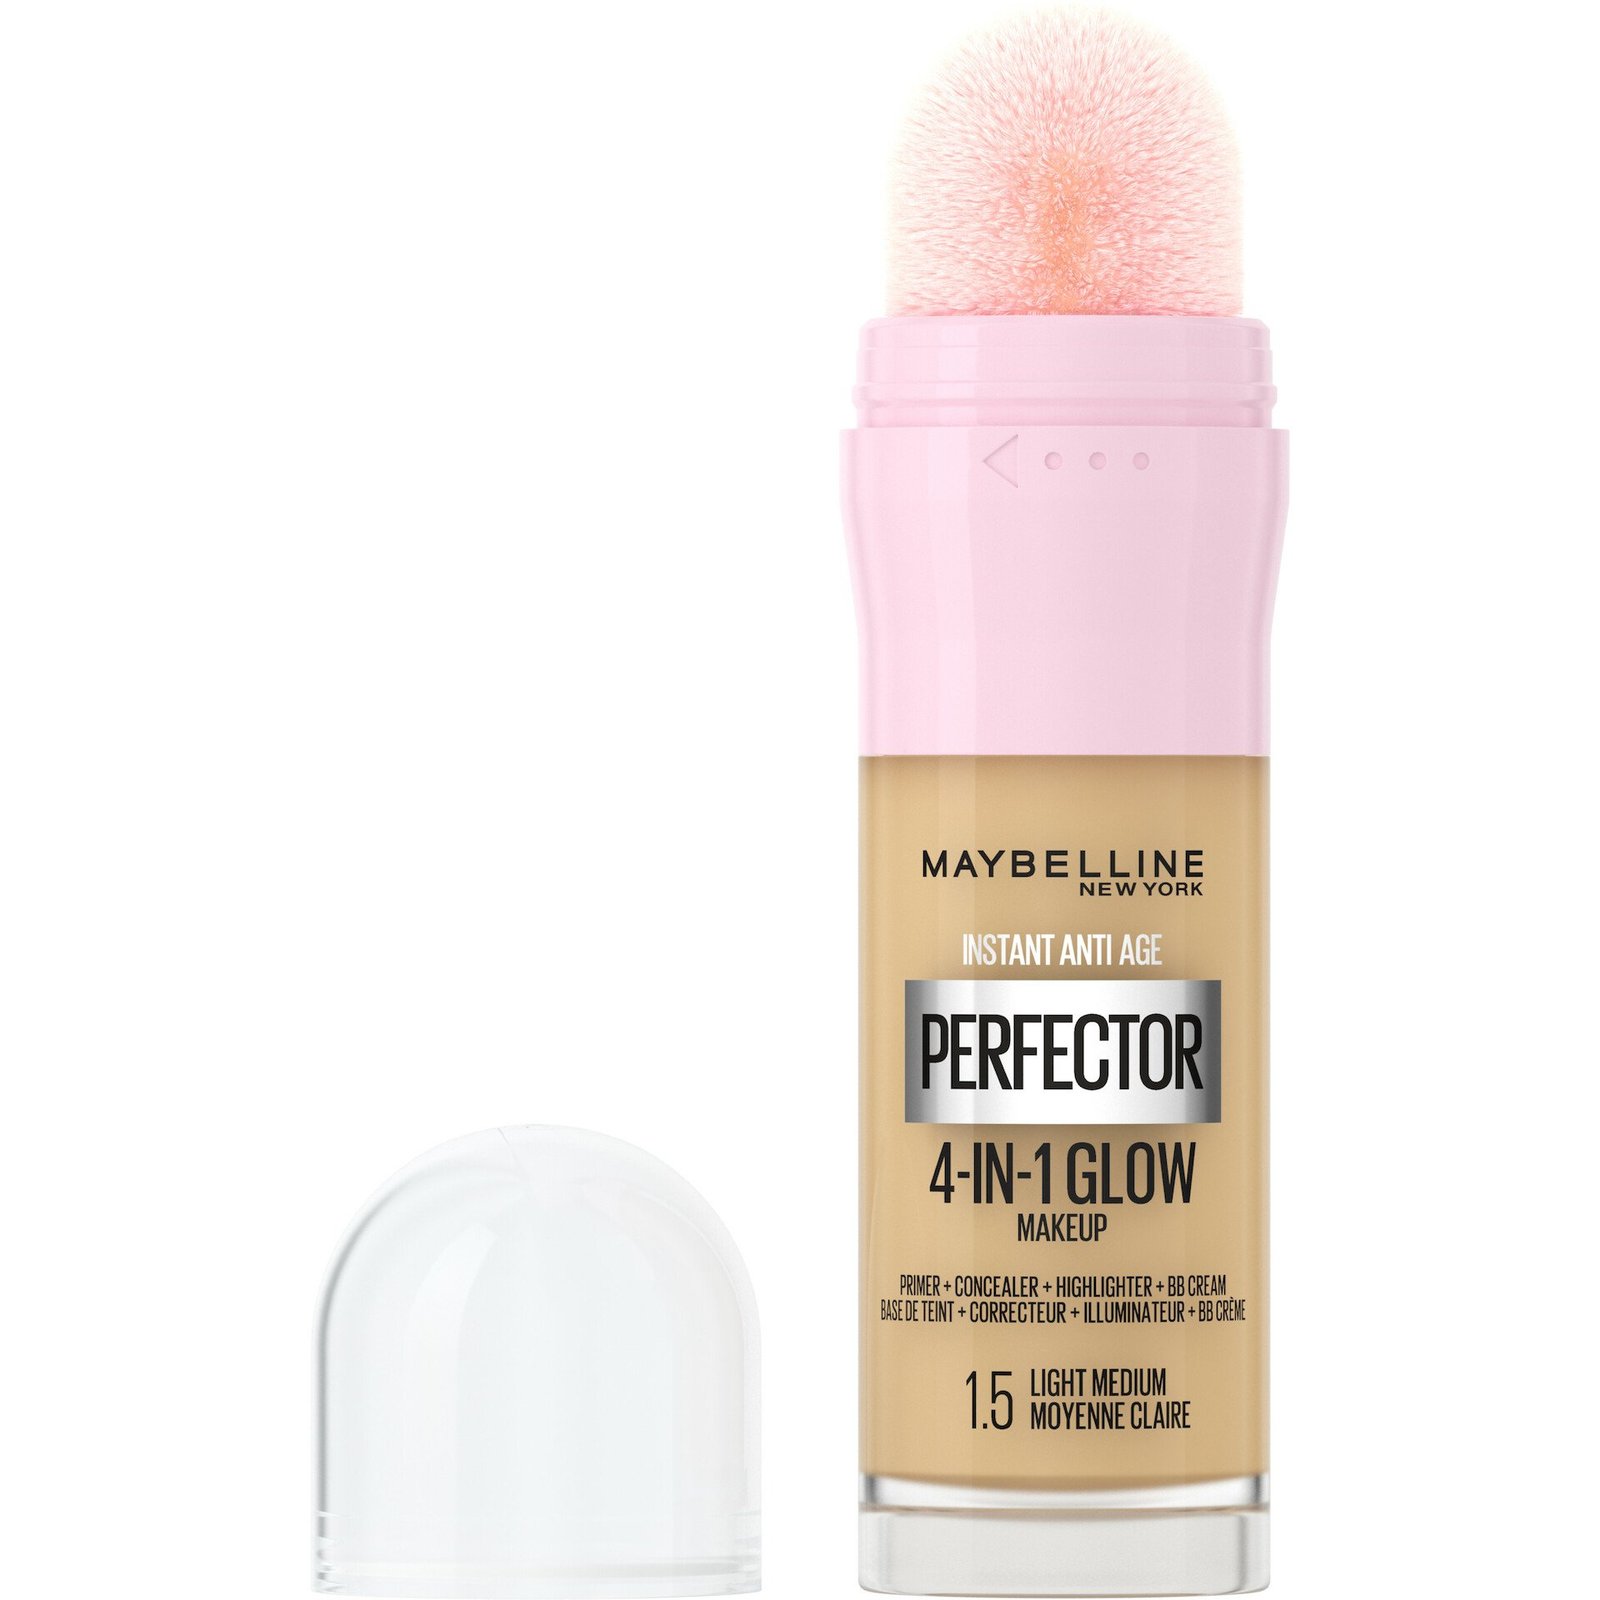 Maybelline New York Instant Perfector 4-in-1 Glow Makeup Foundation 1.5 Light Medium